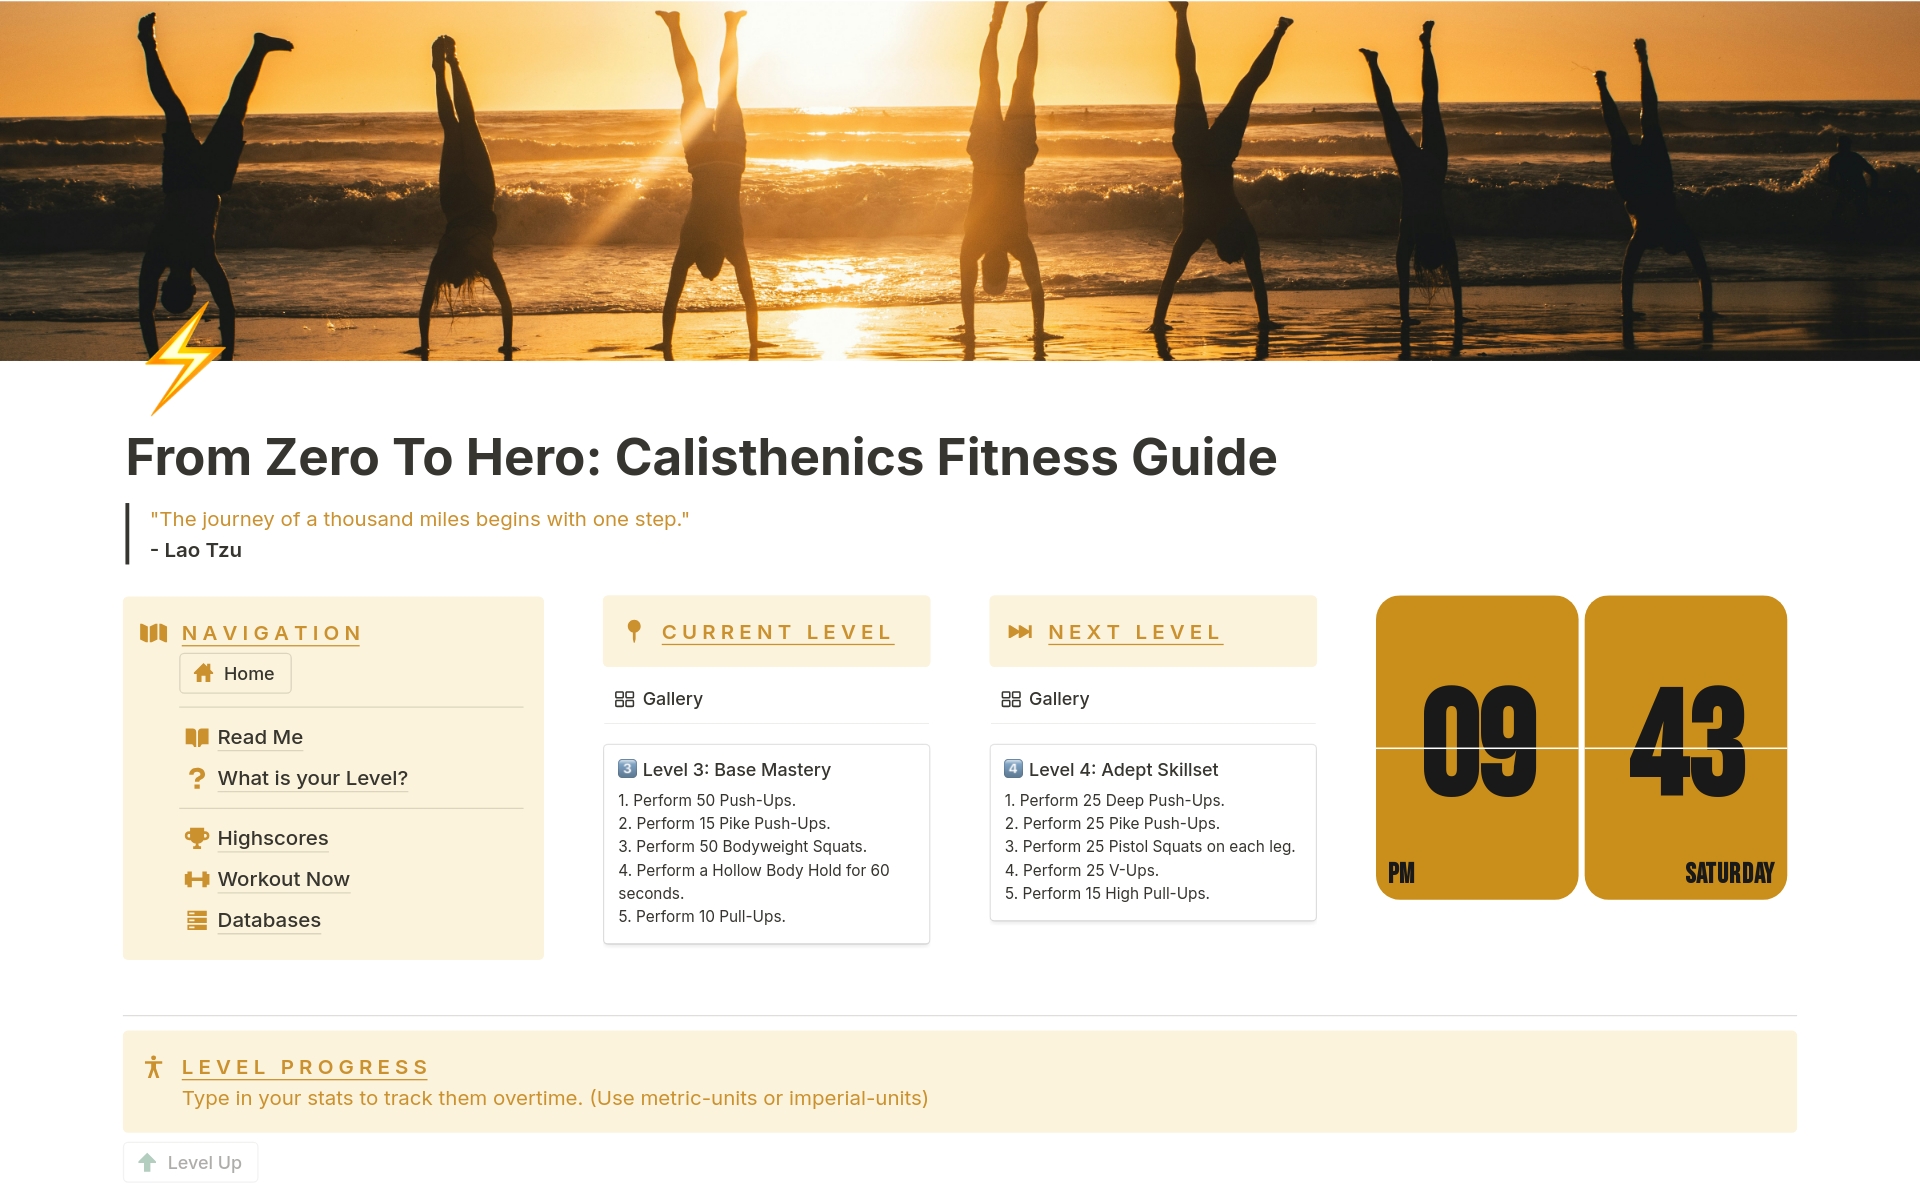 Embark on a journey of transformation with our comprehensive calisthenics fitness guide. Featuring a structured 10-level system, you'll progress safely from beginner to expert while having access to a vast library of 132 exercises, including 15 stretching exercises.